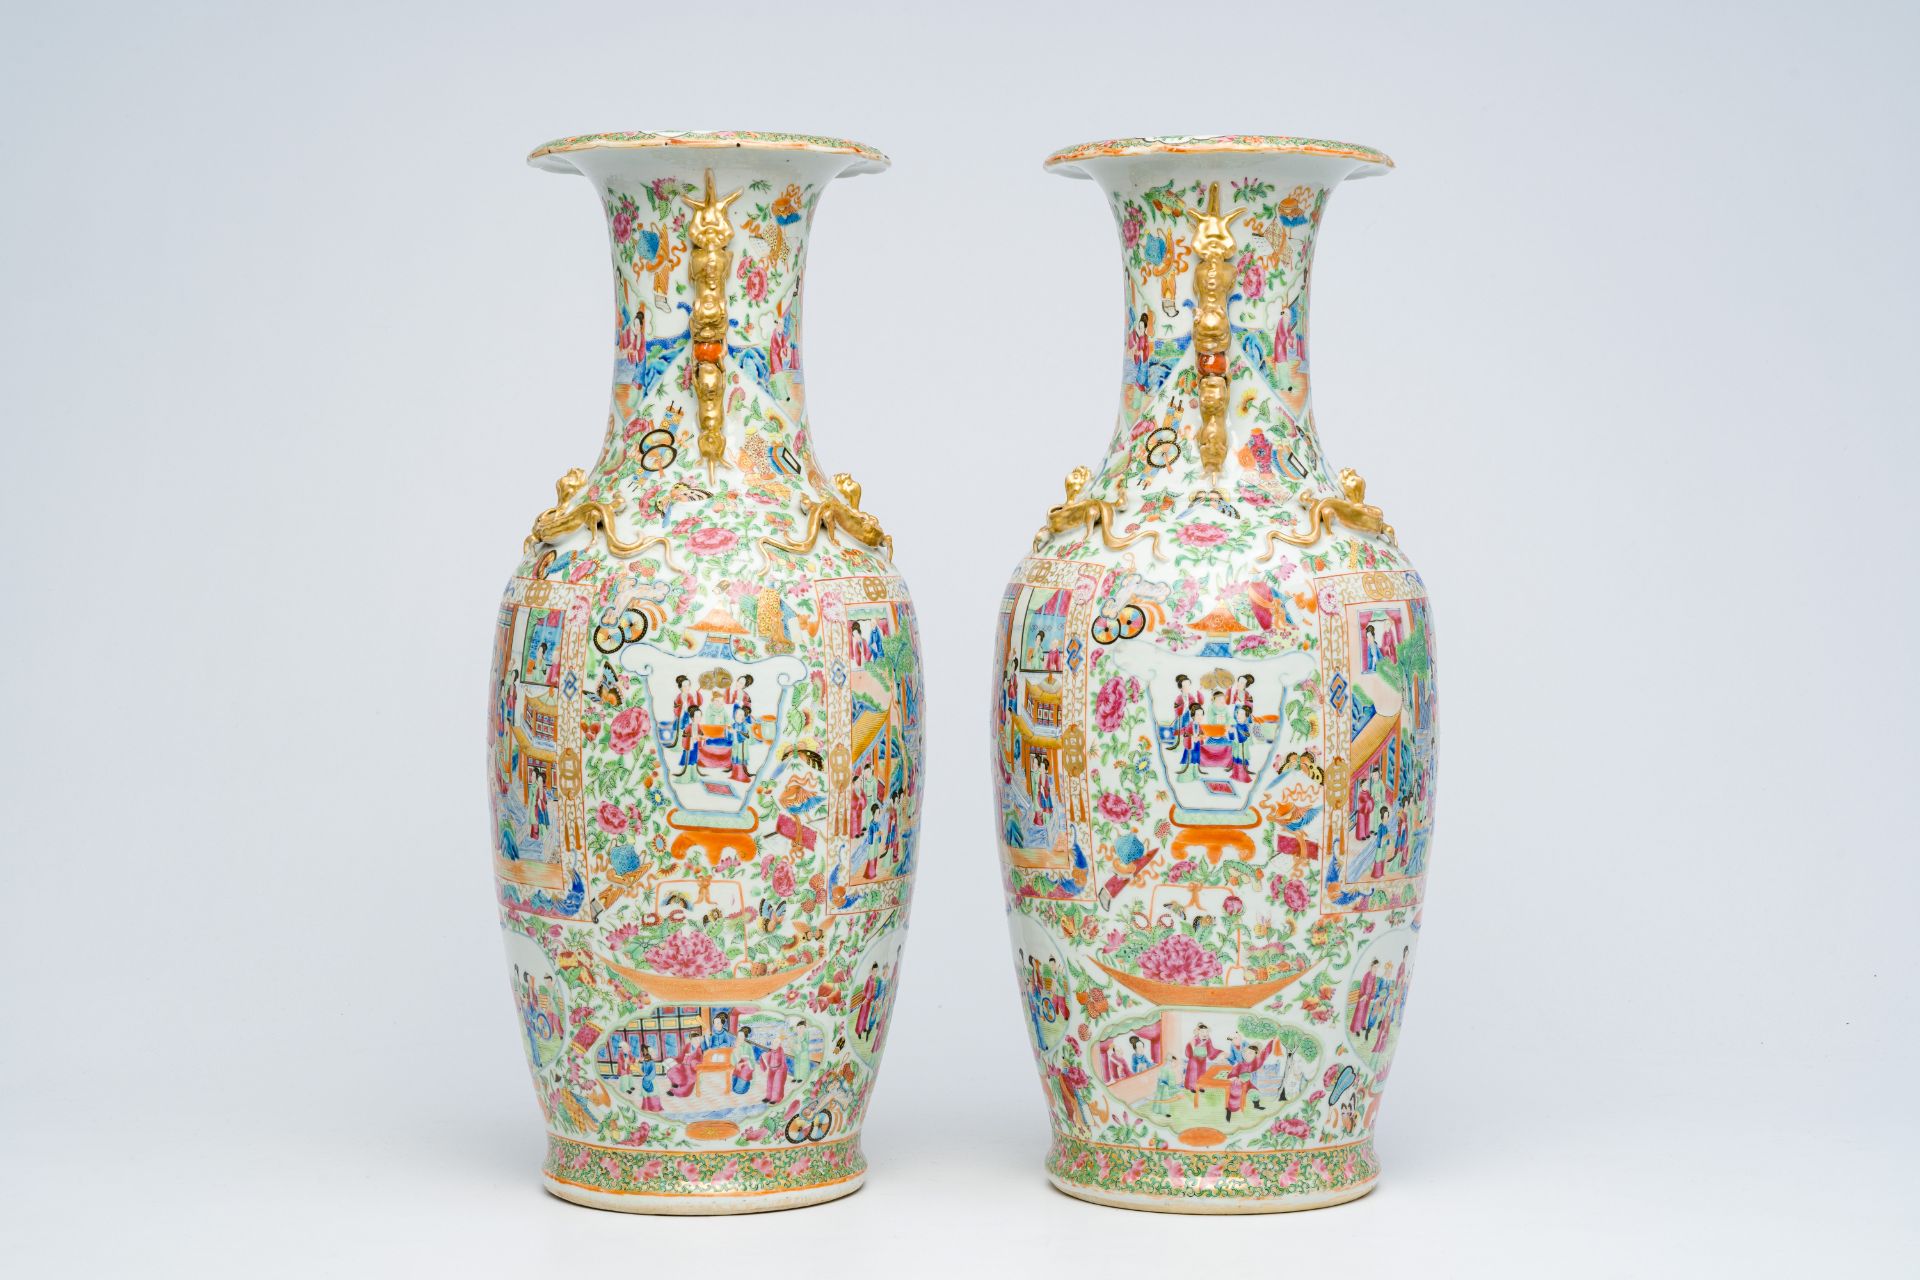 A pair of Chinese Canton famille rose vases with animated scenes, auspicious symbols and butterflies - Image 2 of 6